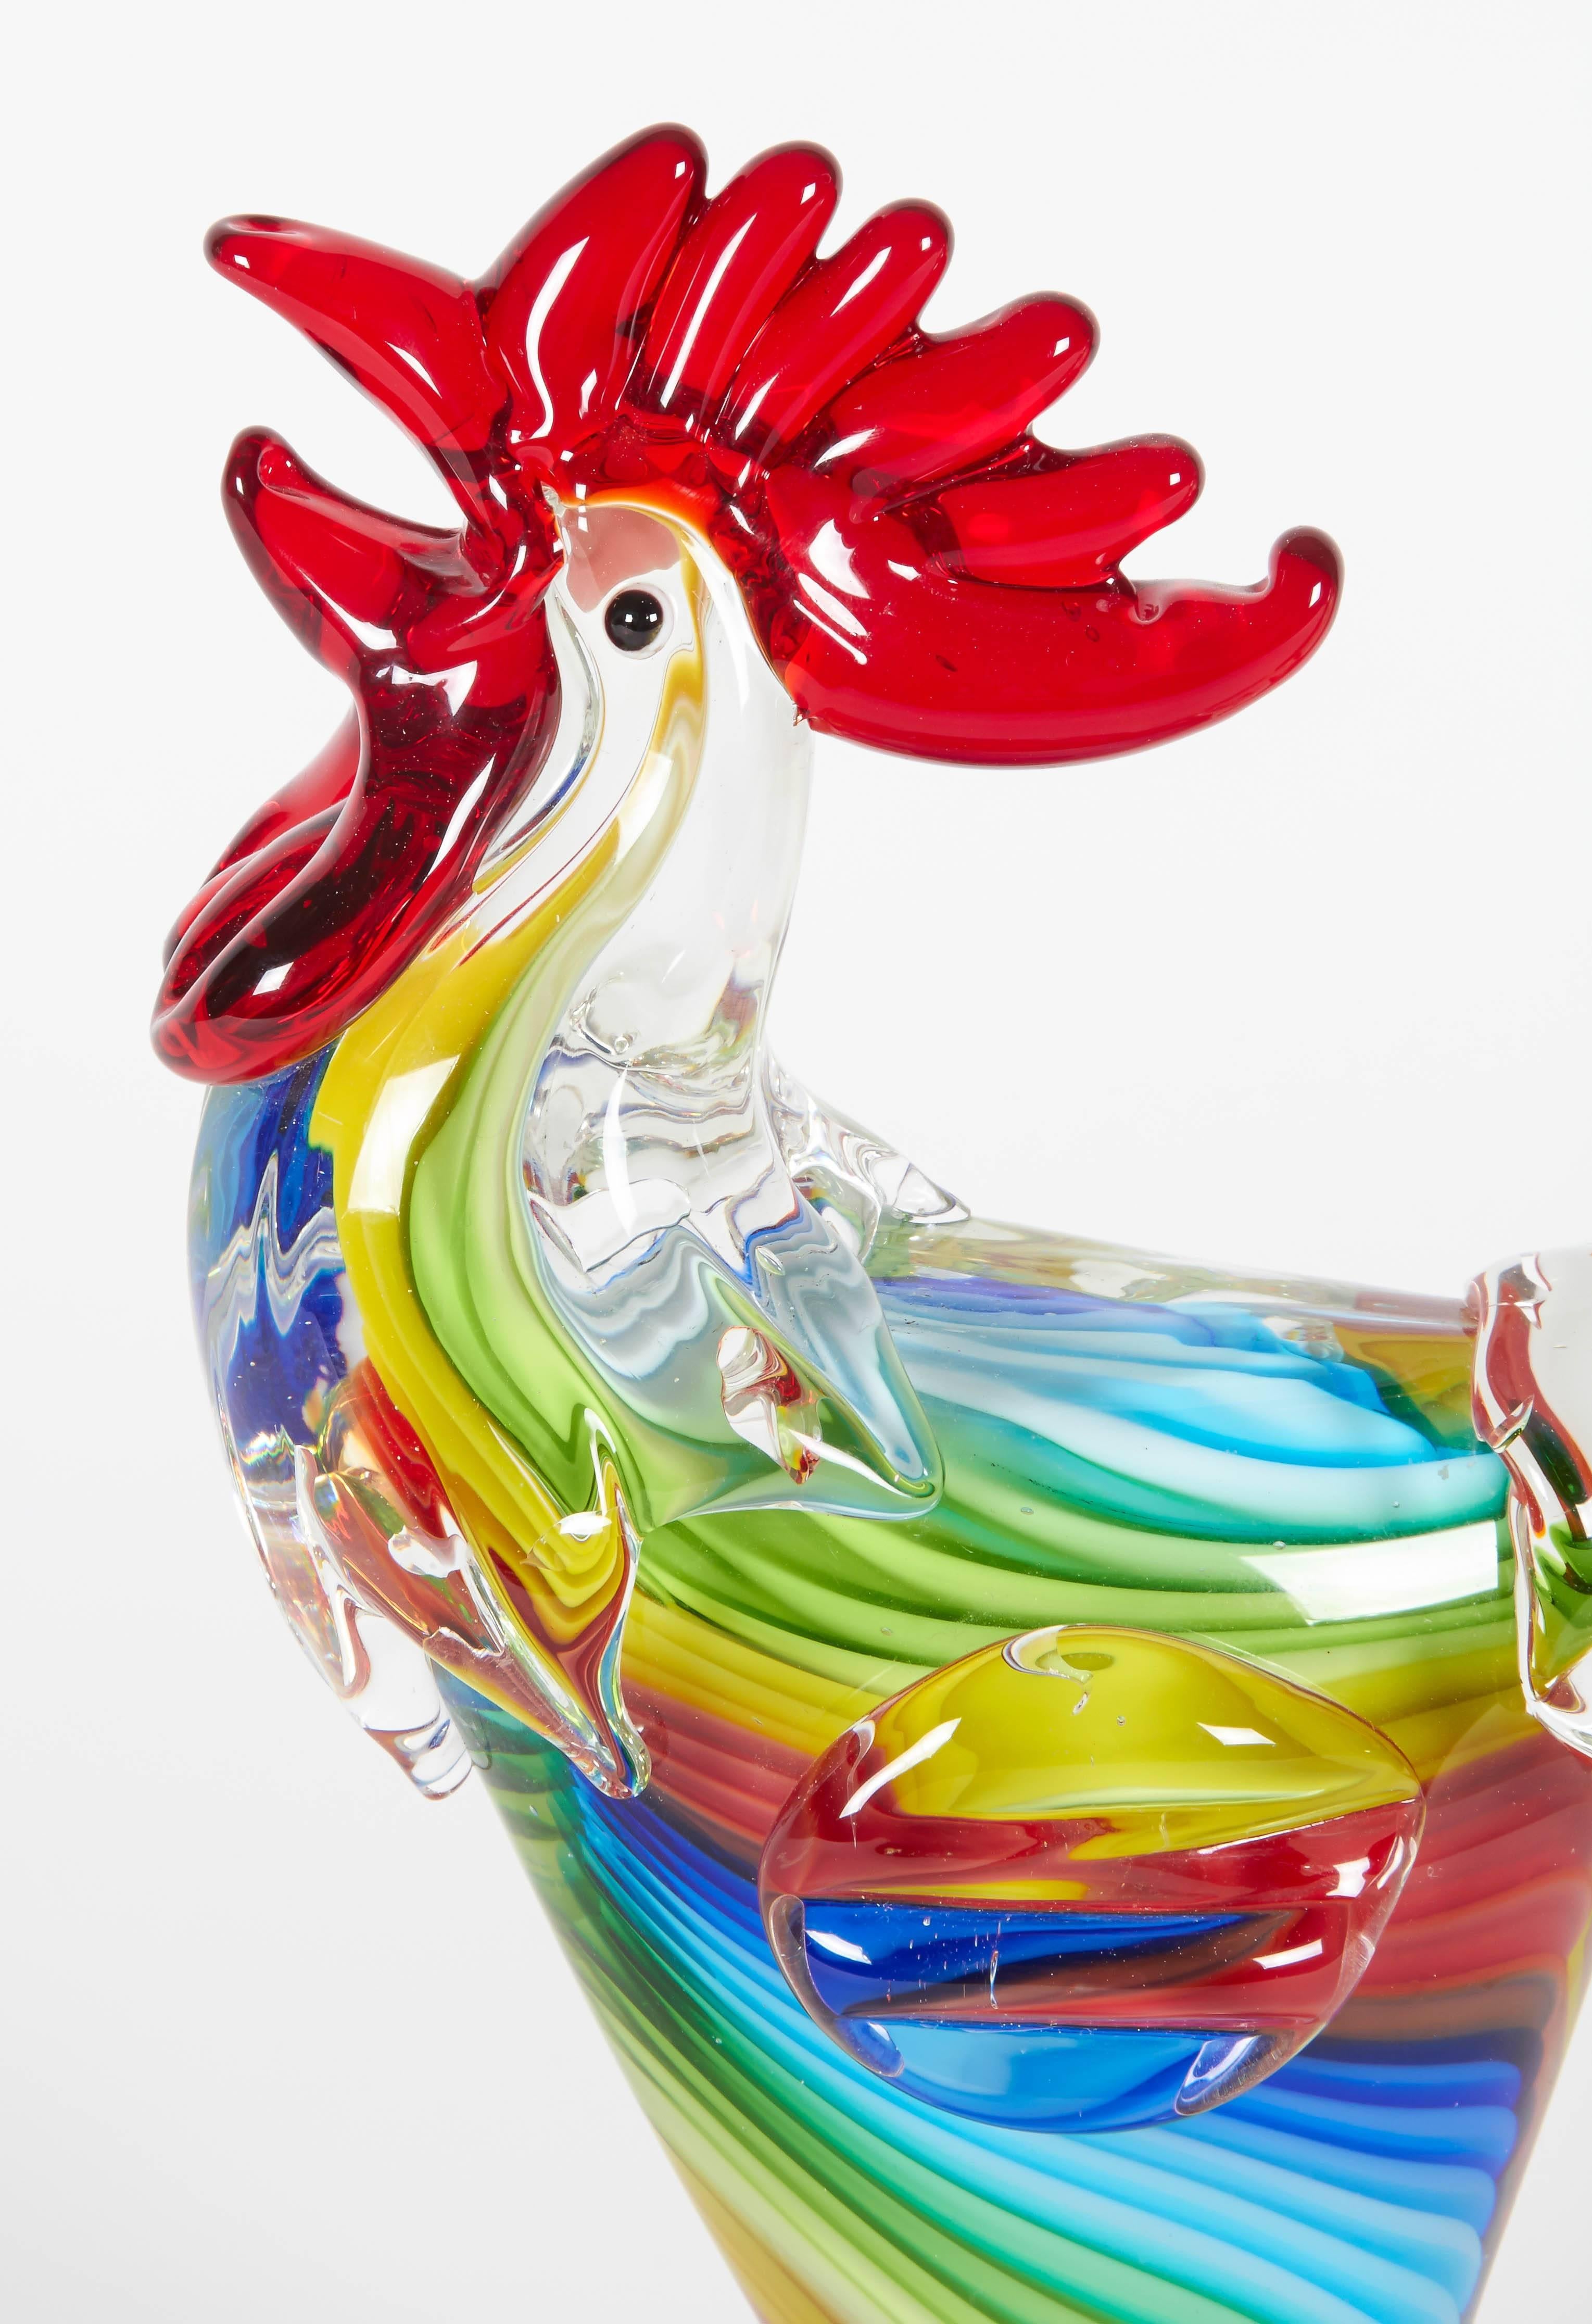 Vintage Murano rooster figurine. This multi color sculpture adds interest and life to any room.